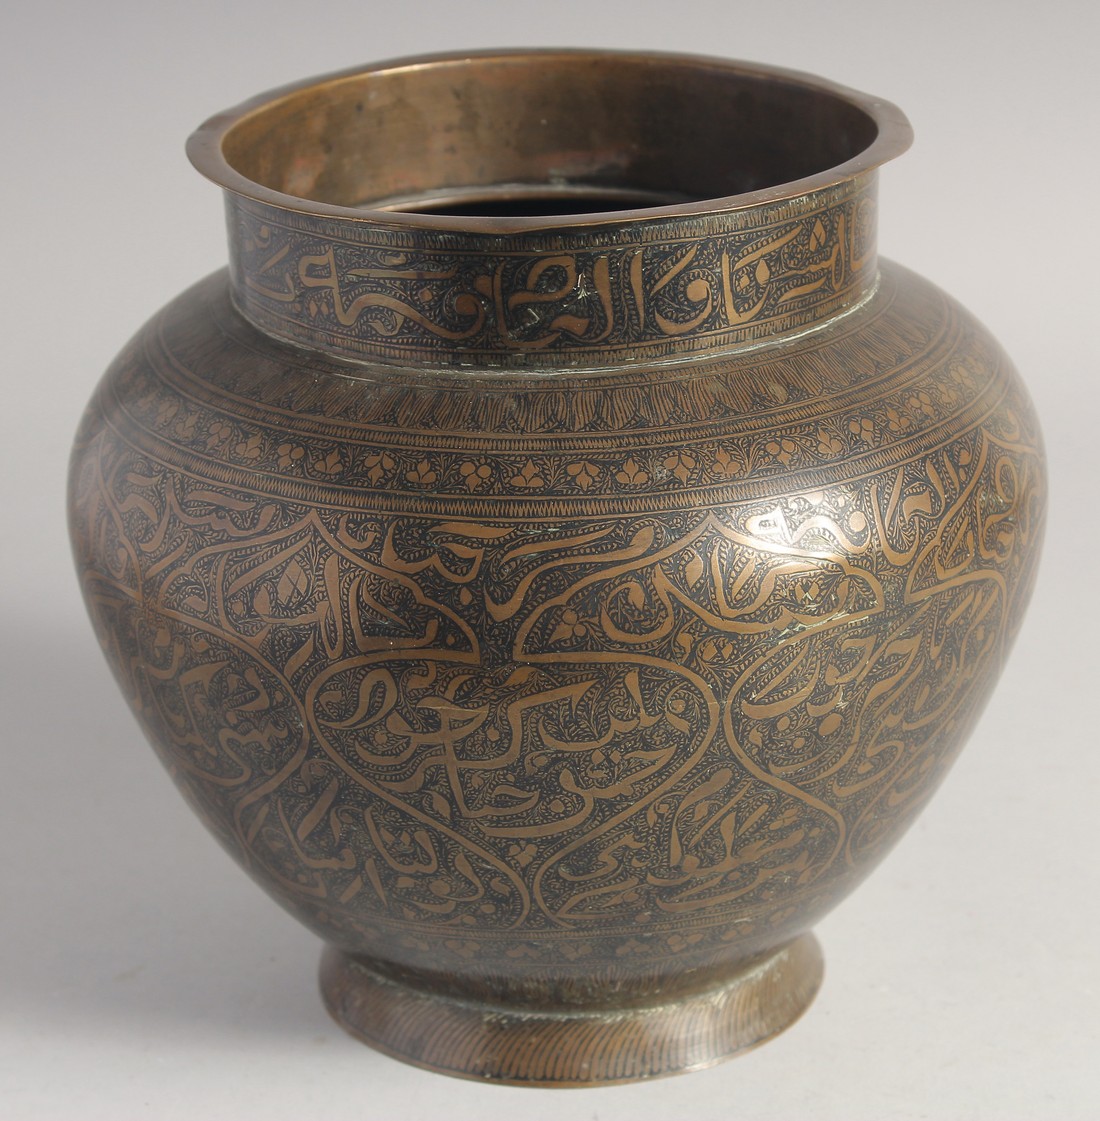 A 19TH CENTURY BLACK ENAMELLED BRASS CALLIGRAPHIC VASE. 21cm high, together with AN ISLAMIC ENGRAVED - Image 7 of 9